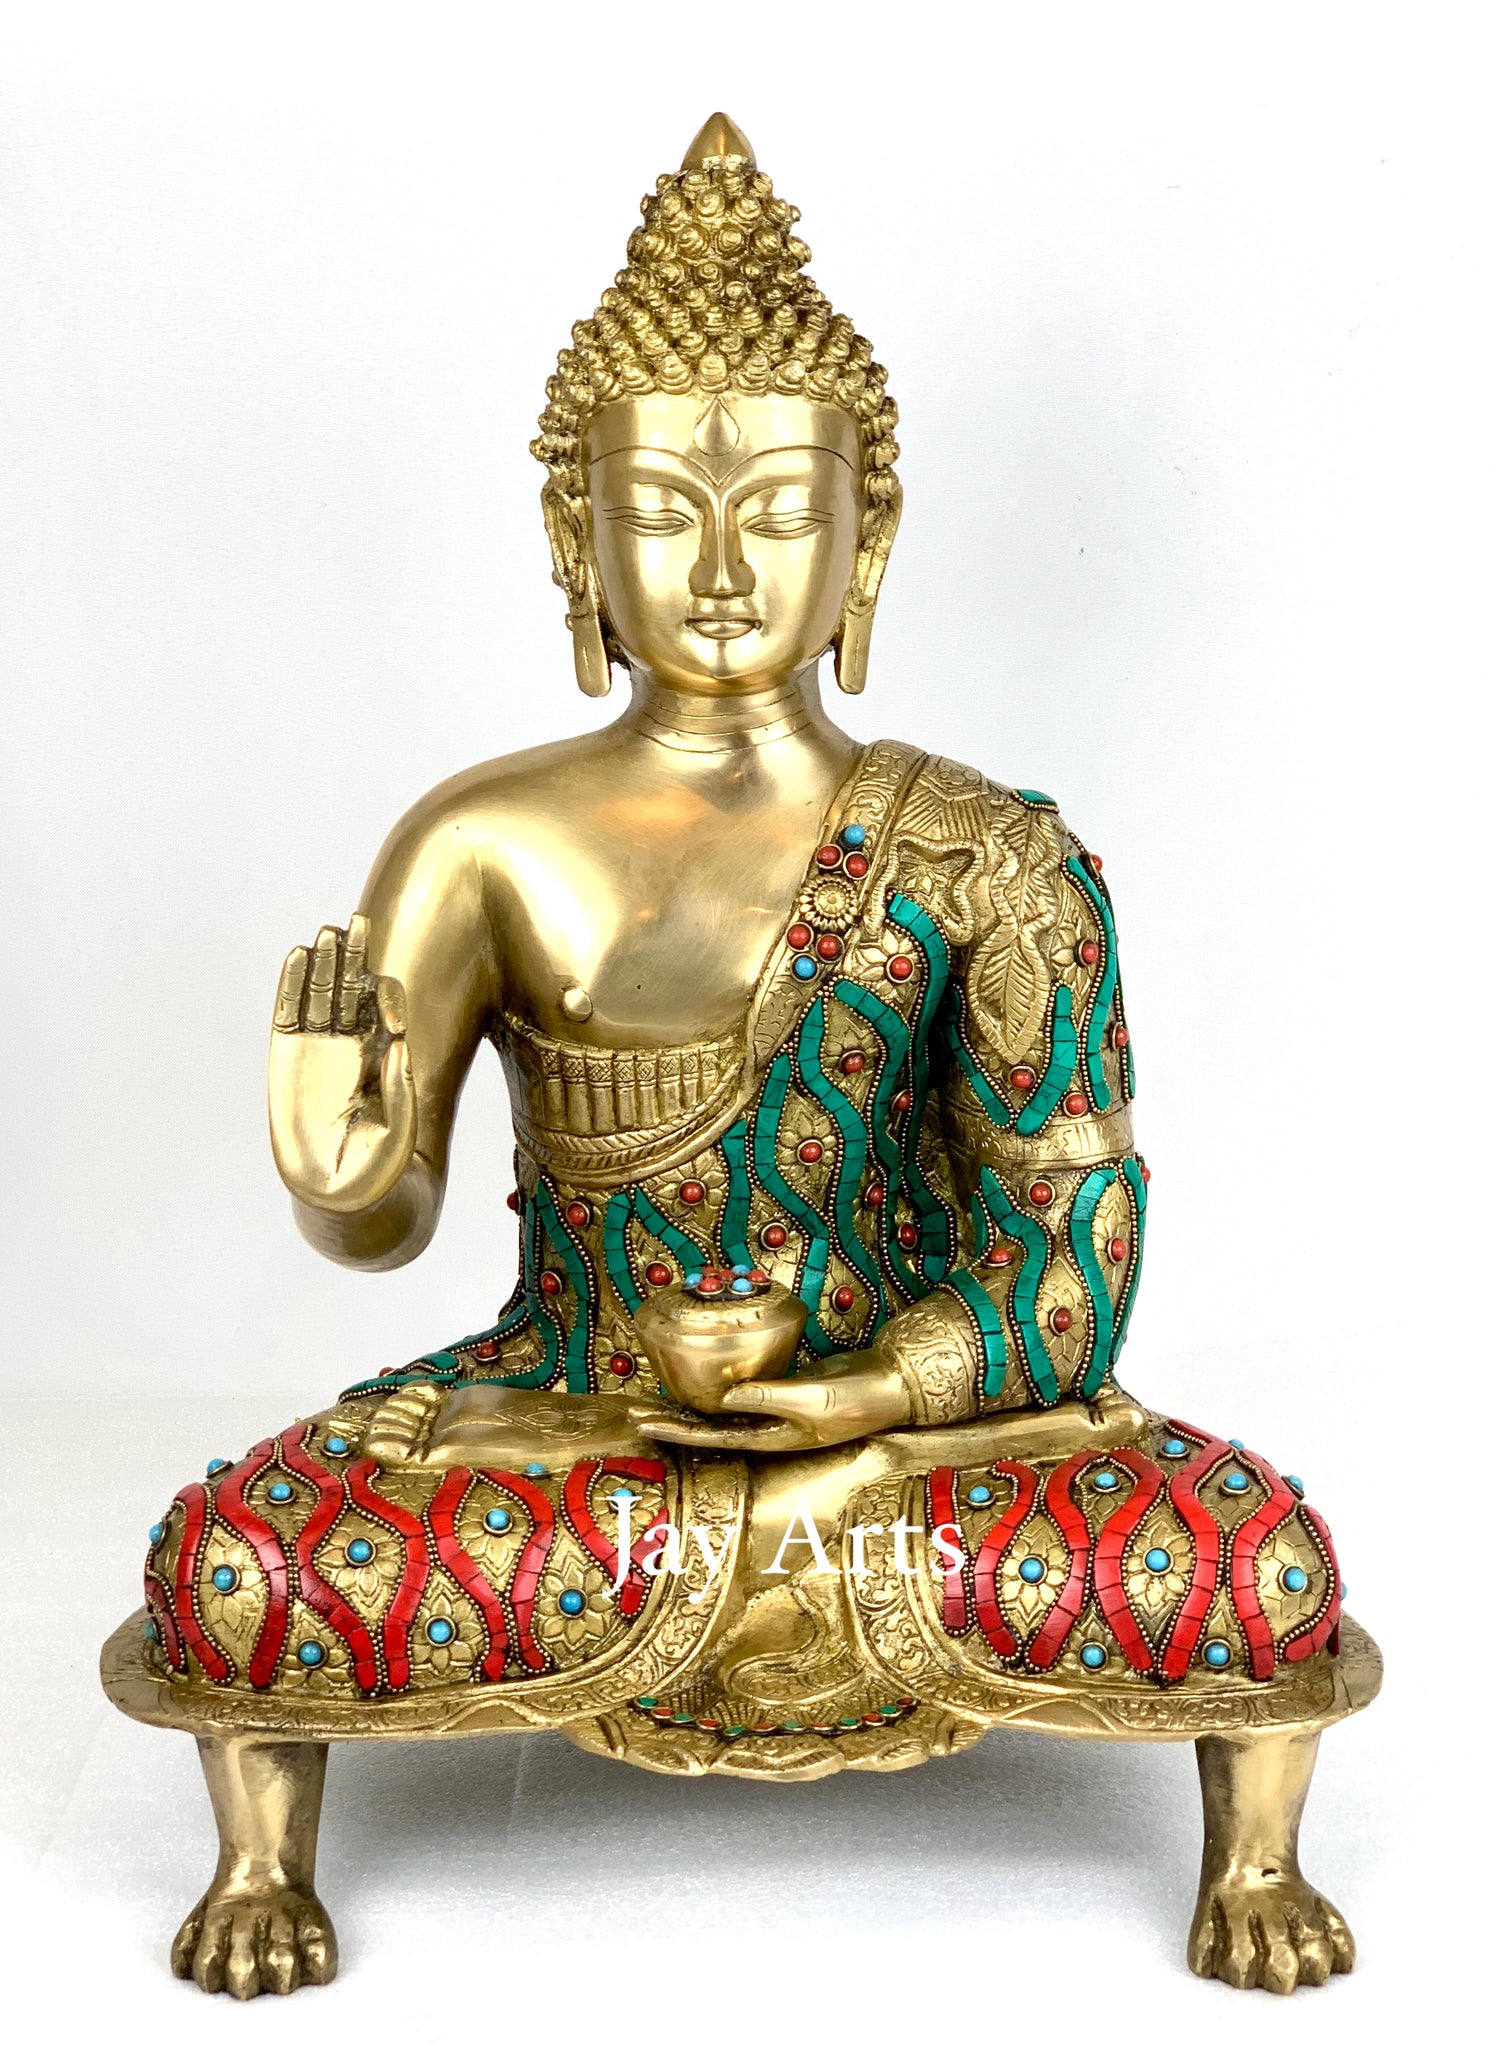 Preaching Buddha with base supported by Lion paws